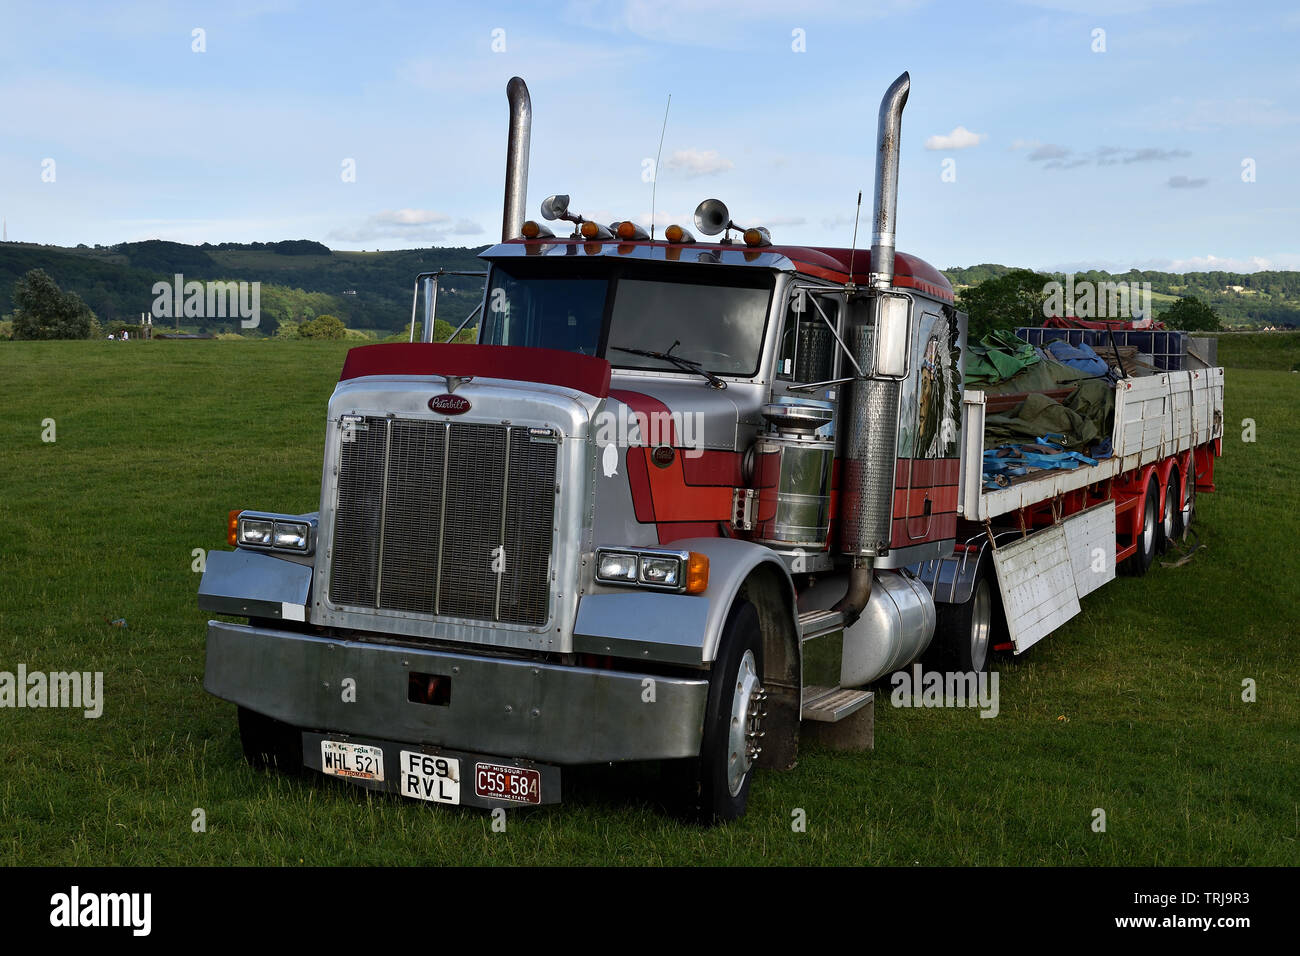 One of the trucks transporting Uncle Sam's American Circus. Stock Photo